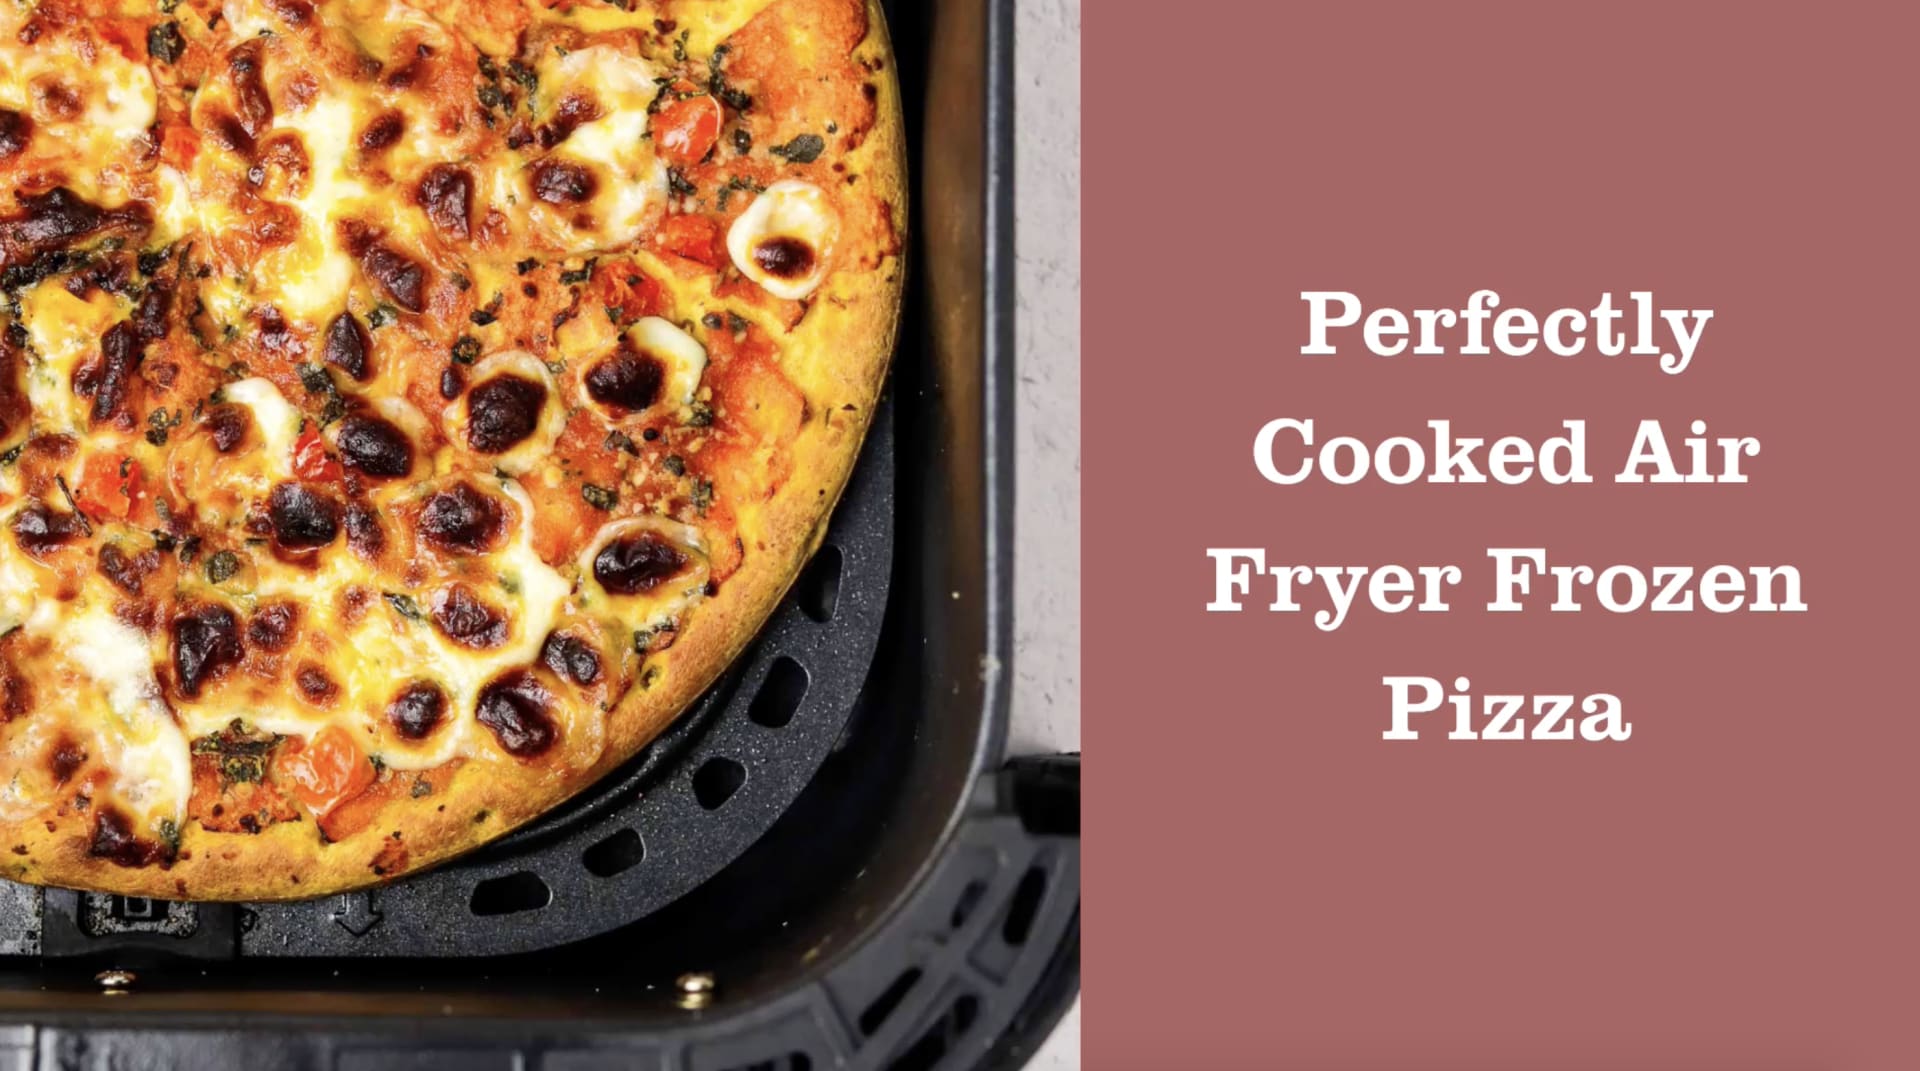 Perfectly create pizza thanks to the 8L Air Fryer Pizza Oven